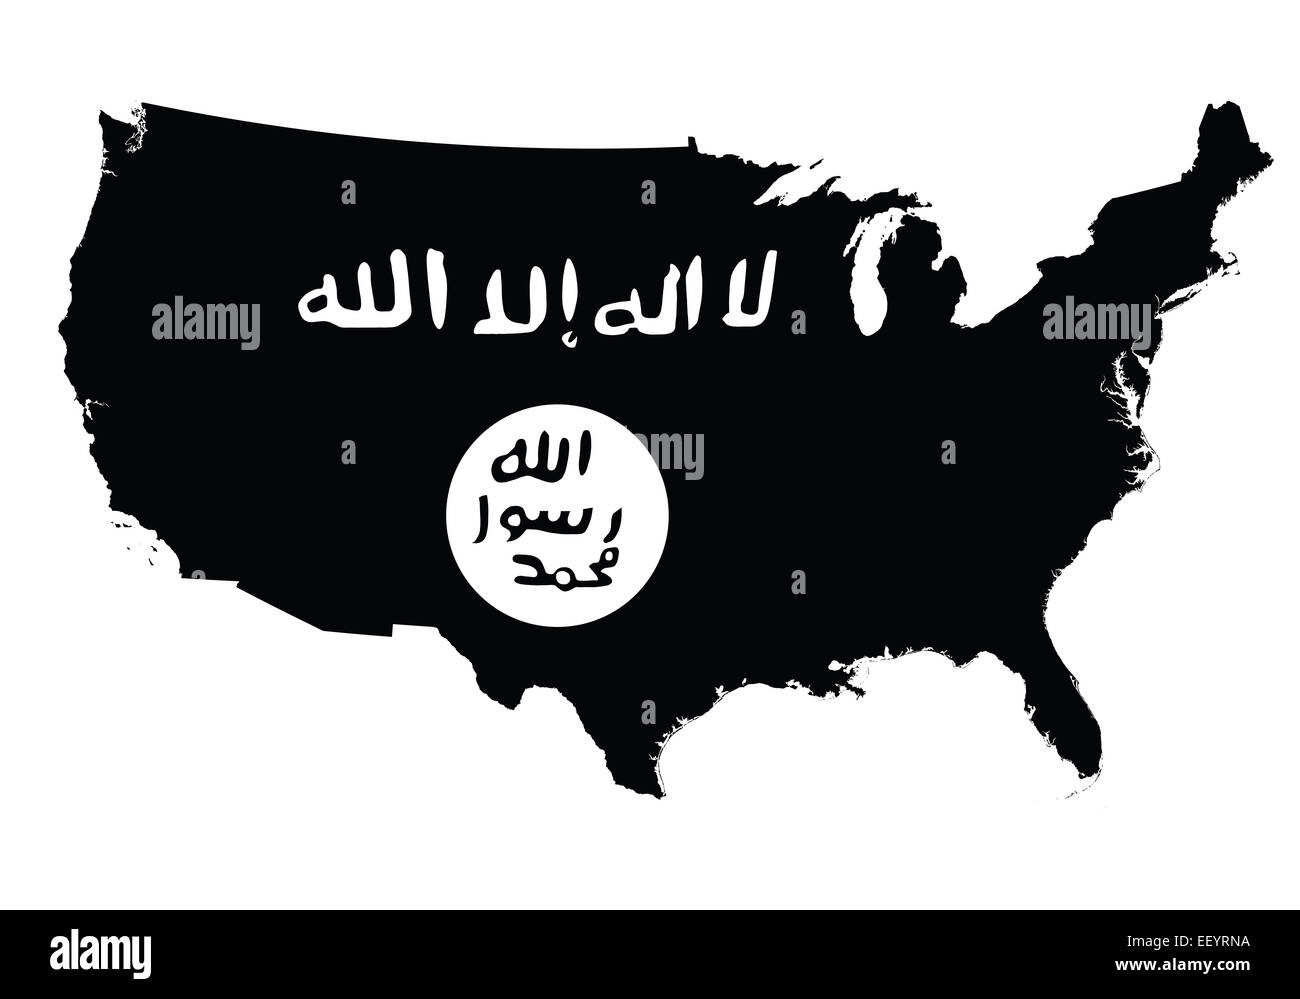 The United States And The Islamic State